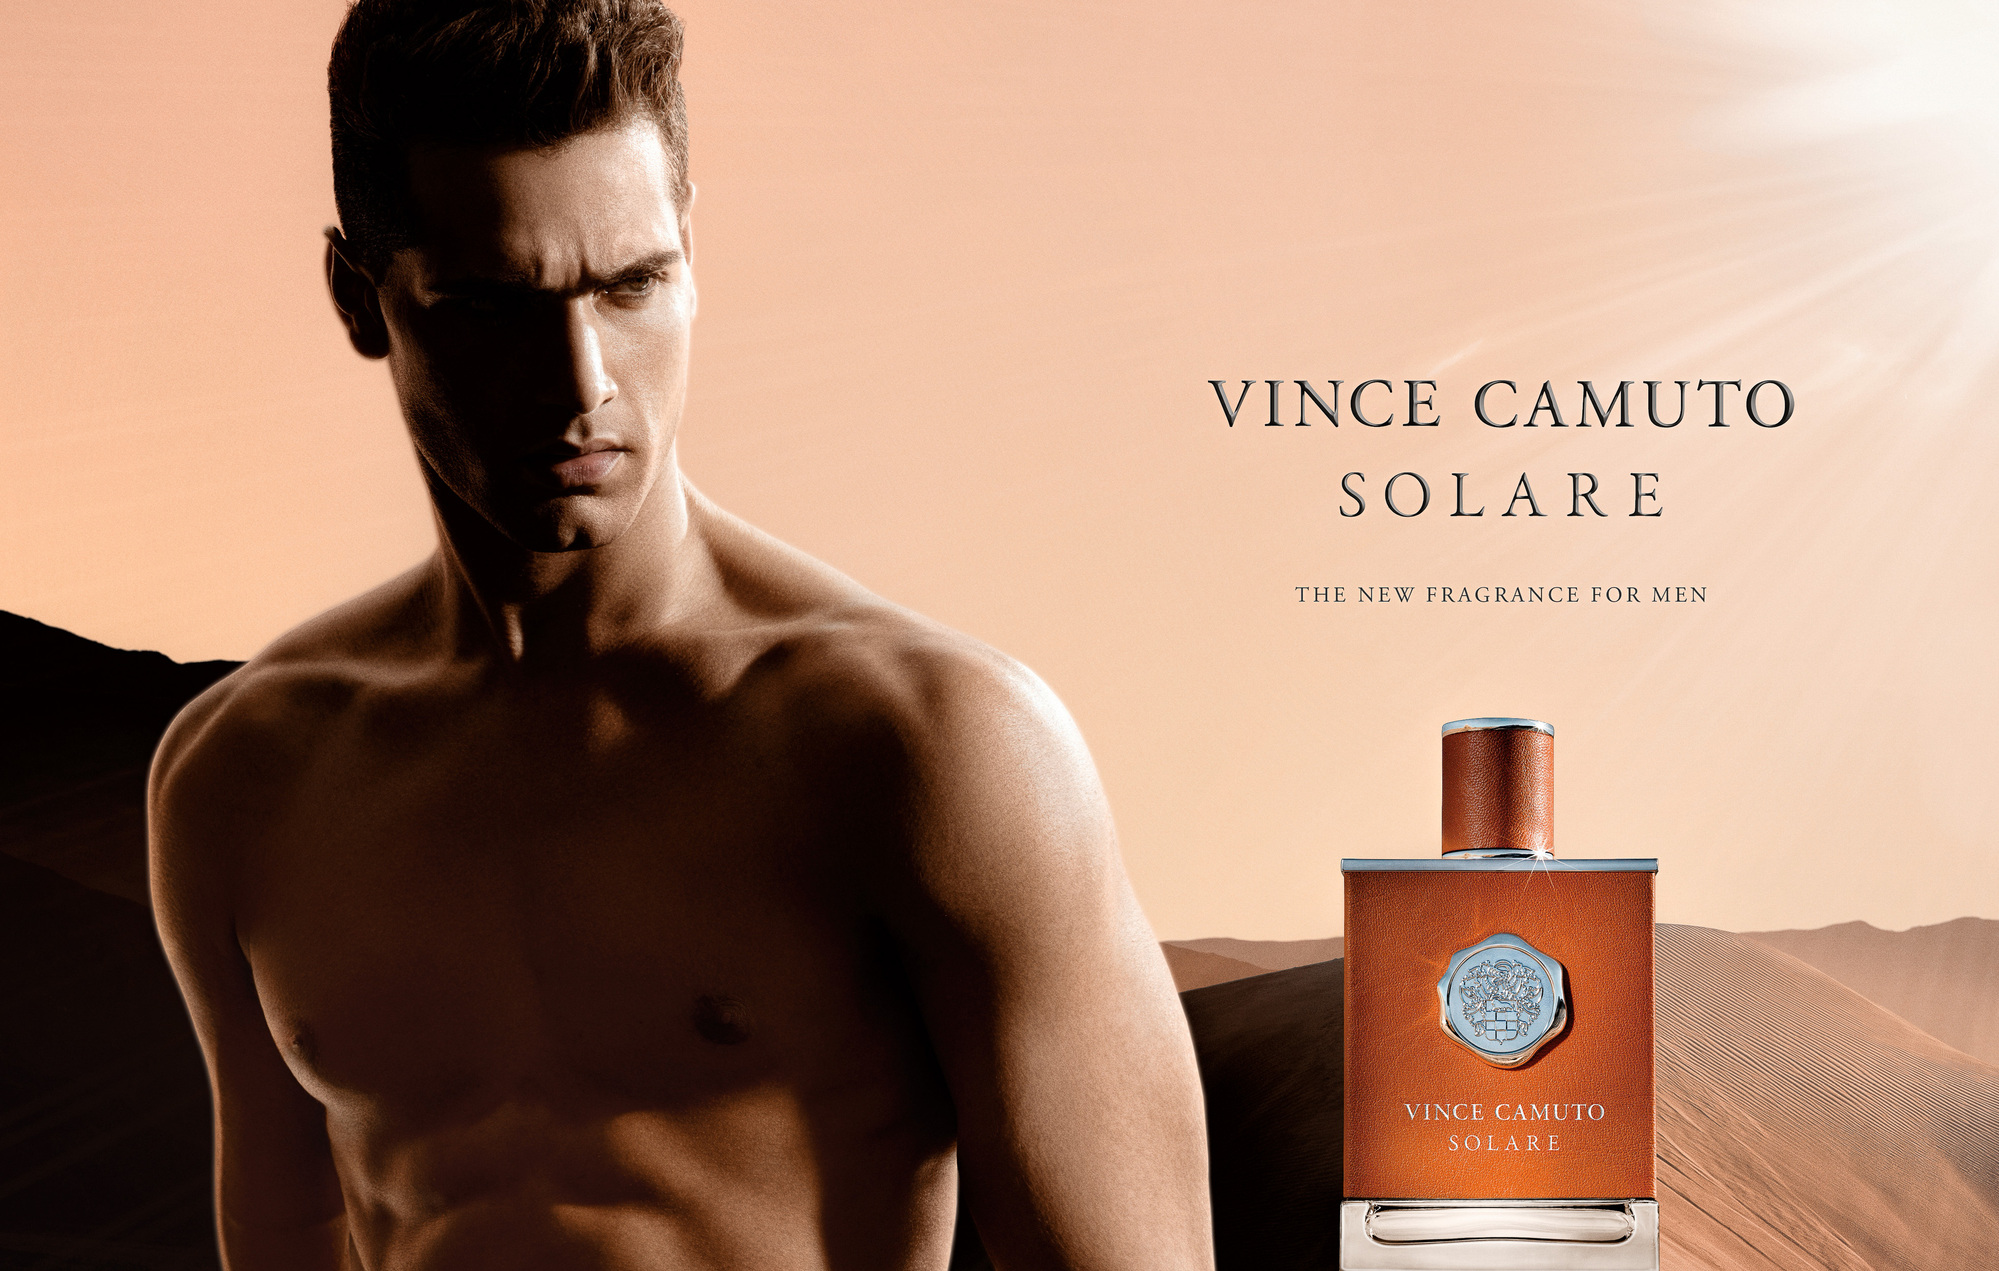 Vince Camuto fragrance campaign photography  by commercial, product & advertising photographer Timothy Hogan in studio Los Angeles